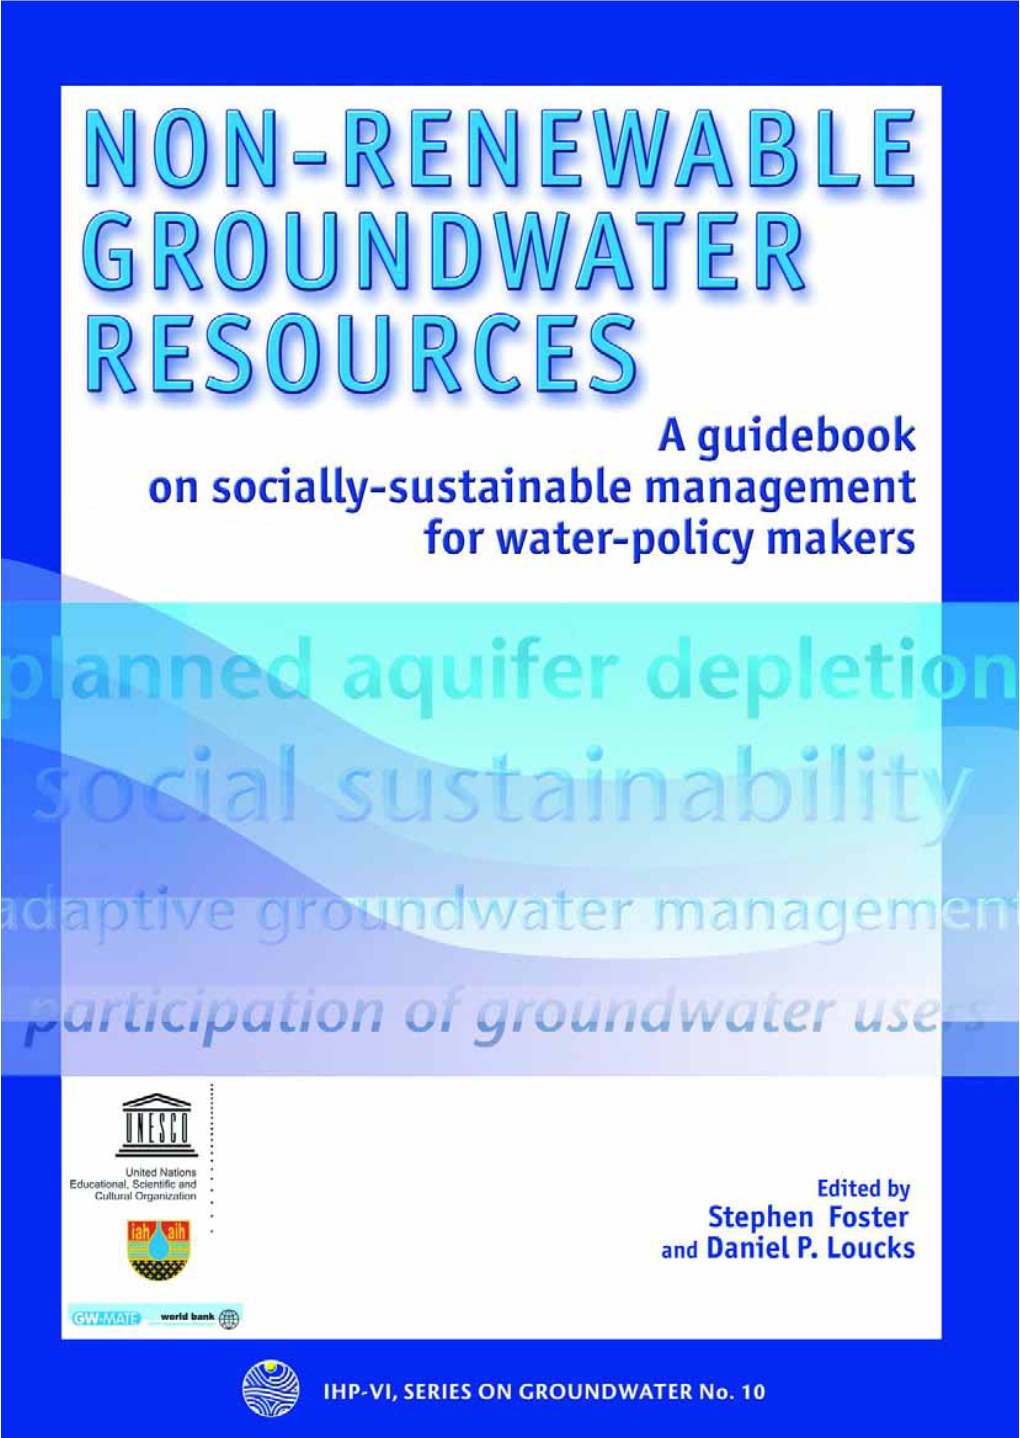 Non-Renewable Groundwater Resources Since 1996